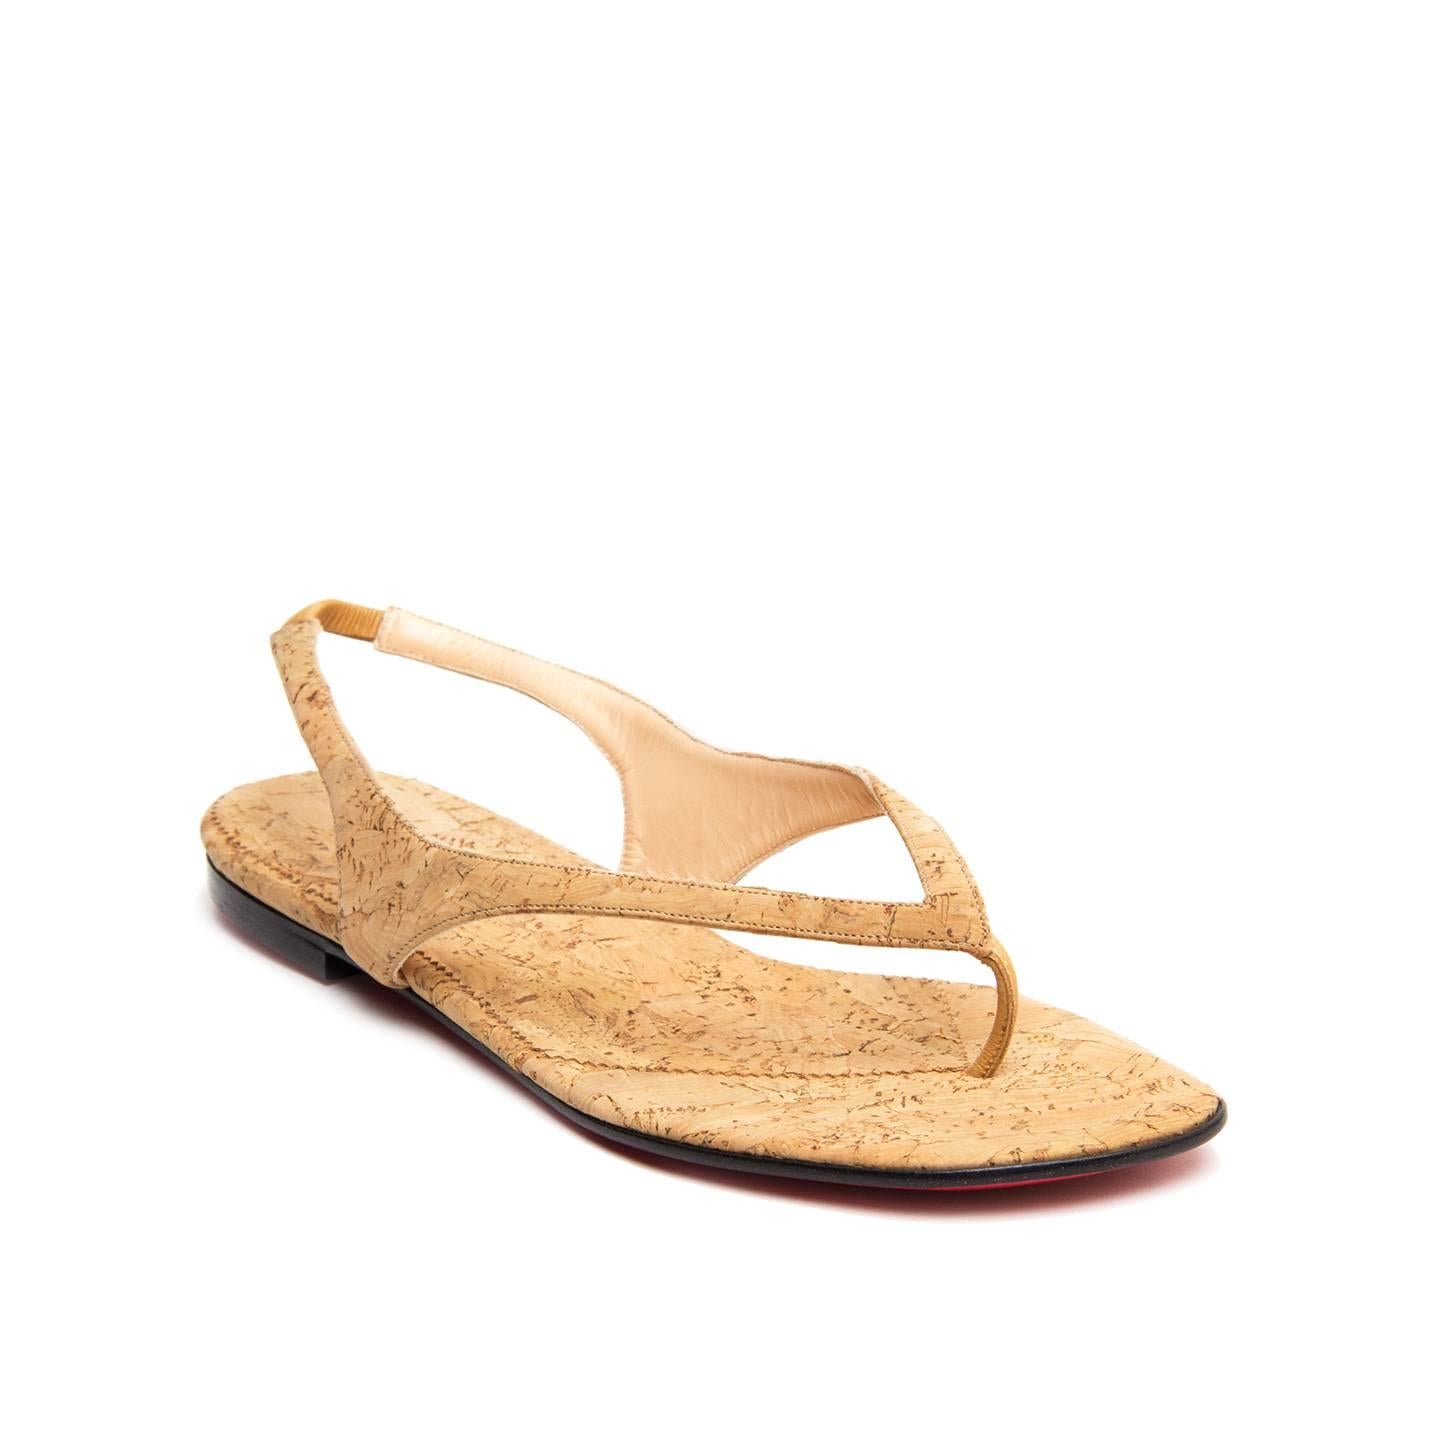 Solid cork thong sandals with sling back. Vero Cuoio. Made in Italy.

Size  40 Italian sizing

Condition  Excellent: never worn